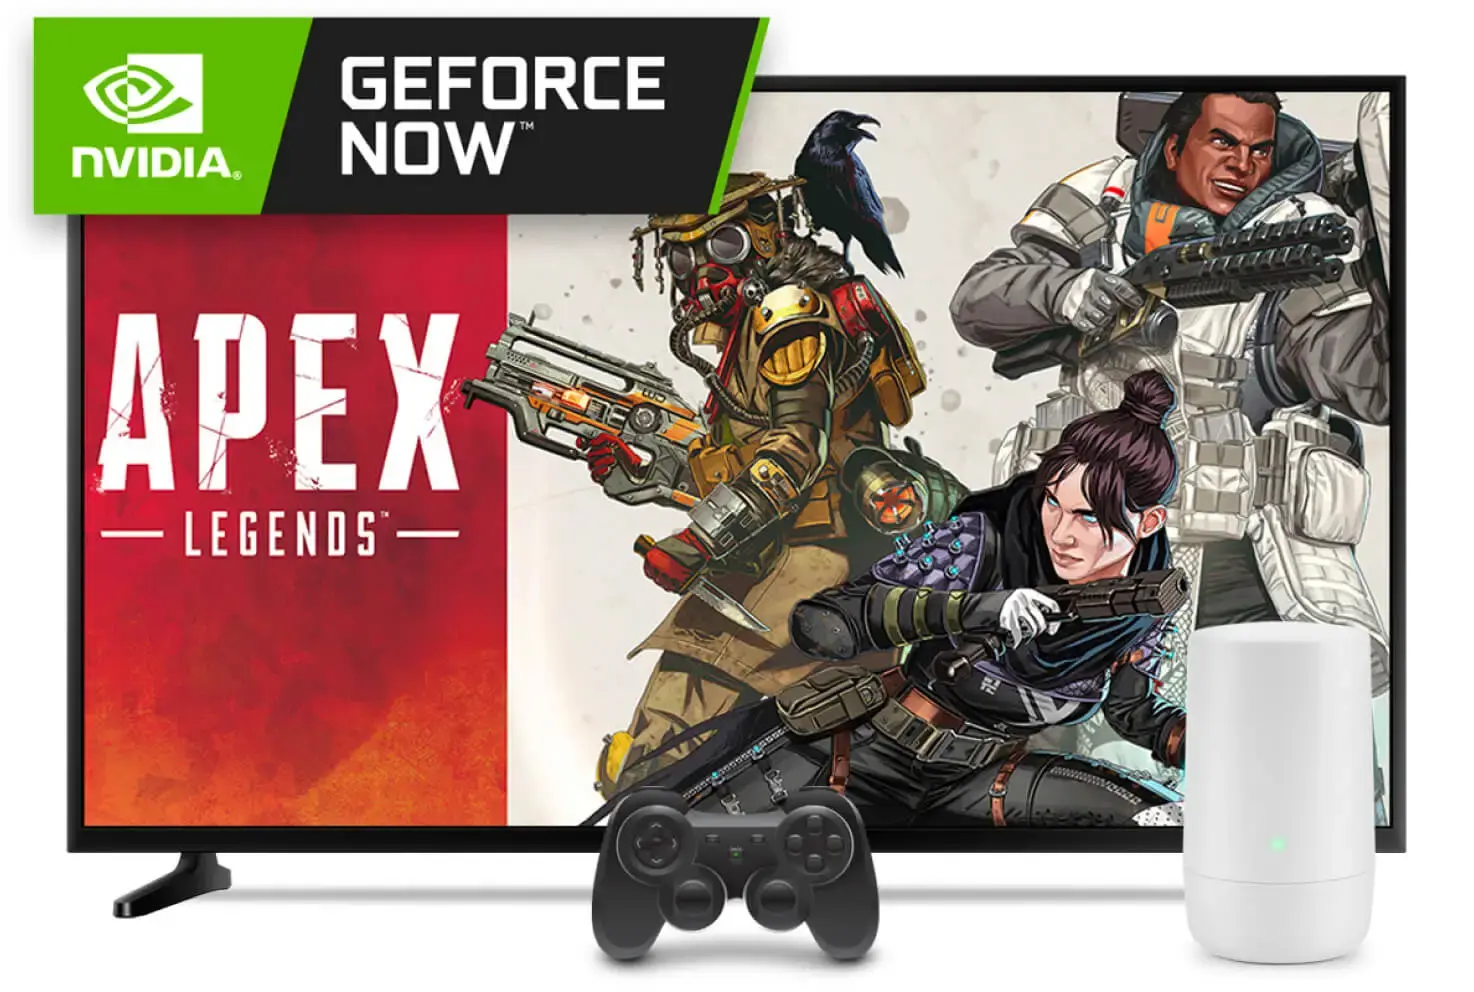 Image on TV from video game Apex Legends of three characters in armour with weapons. Logo for Nvidia Geforce Now, a game controller and TELUS modem.